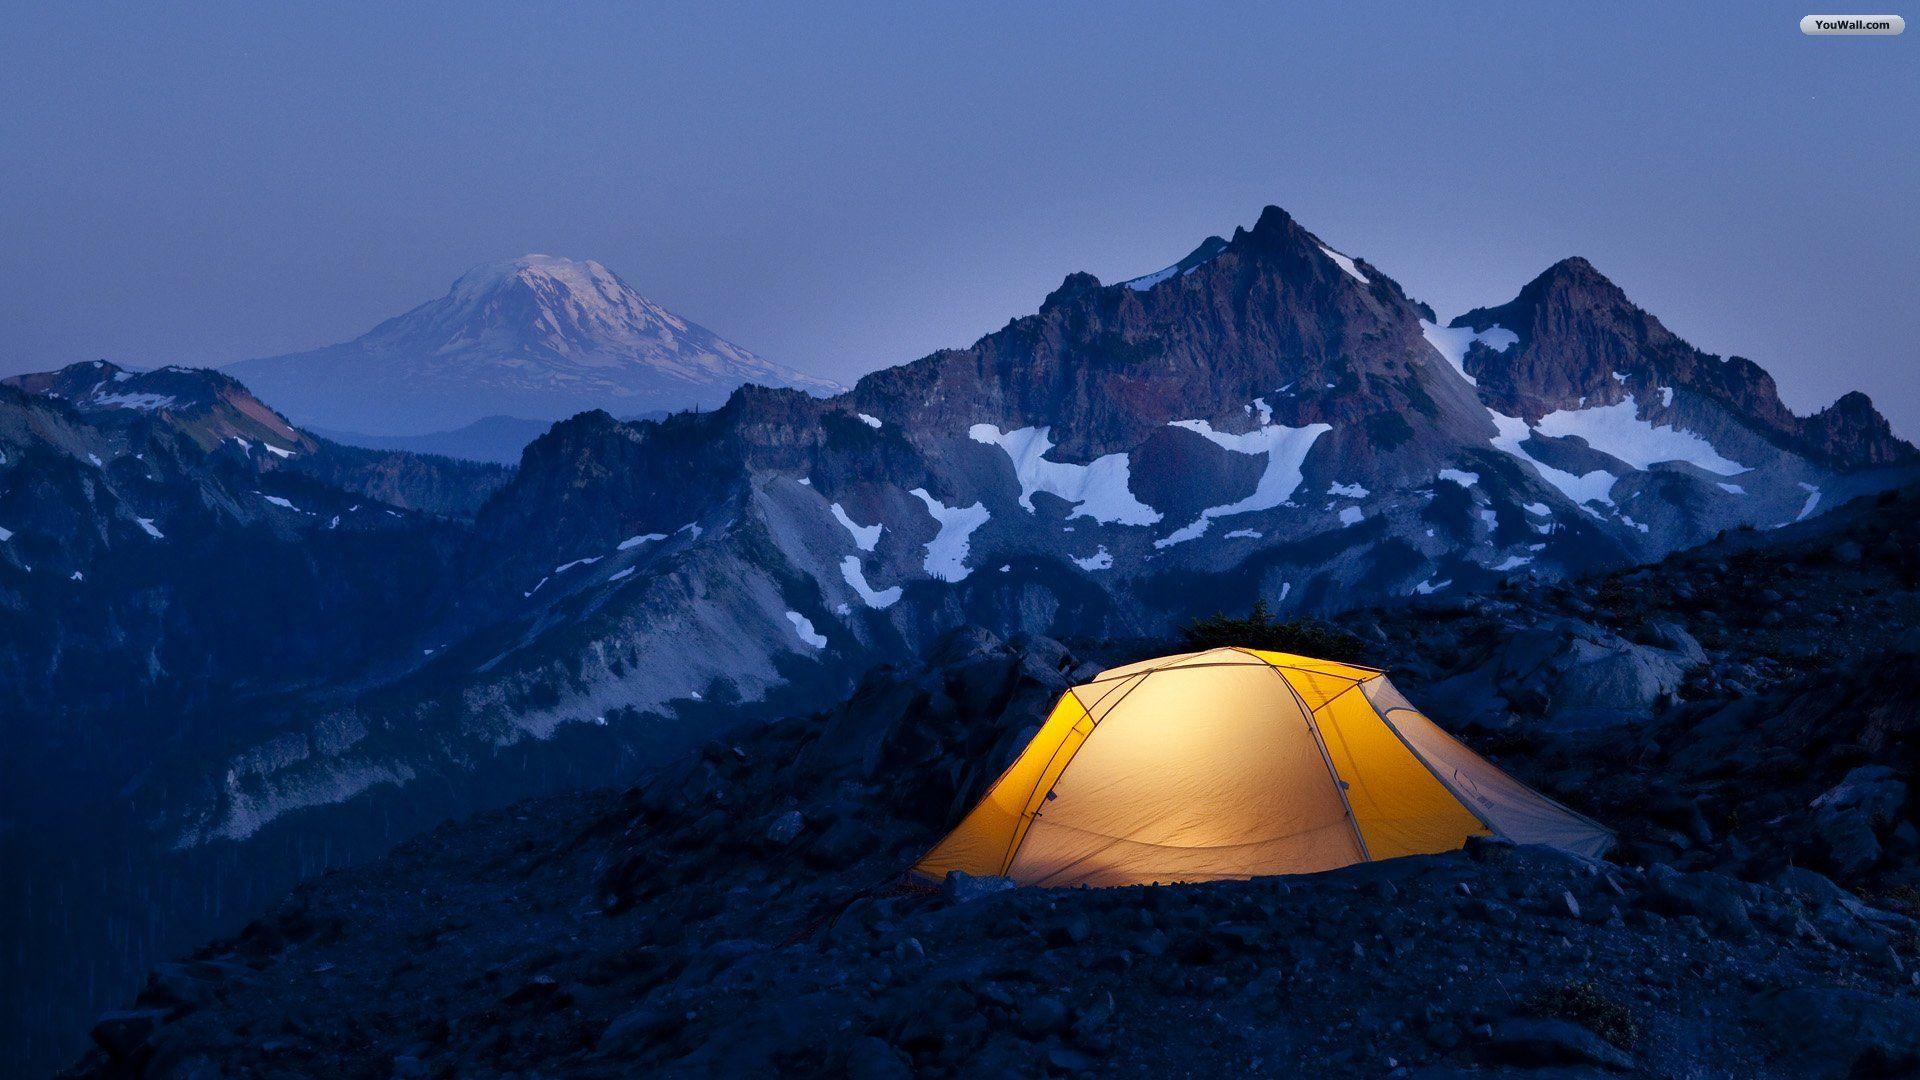 Tent Camping On Mountain Wallpaper at